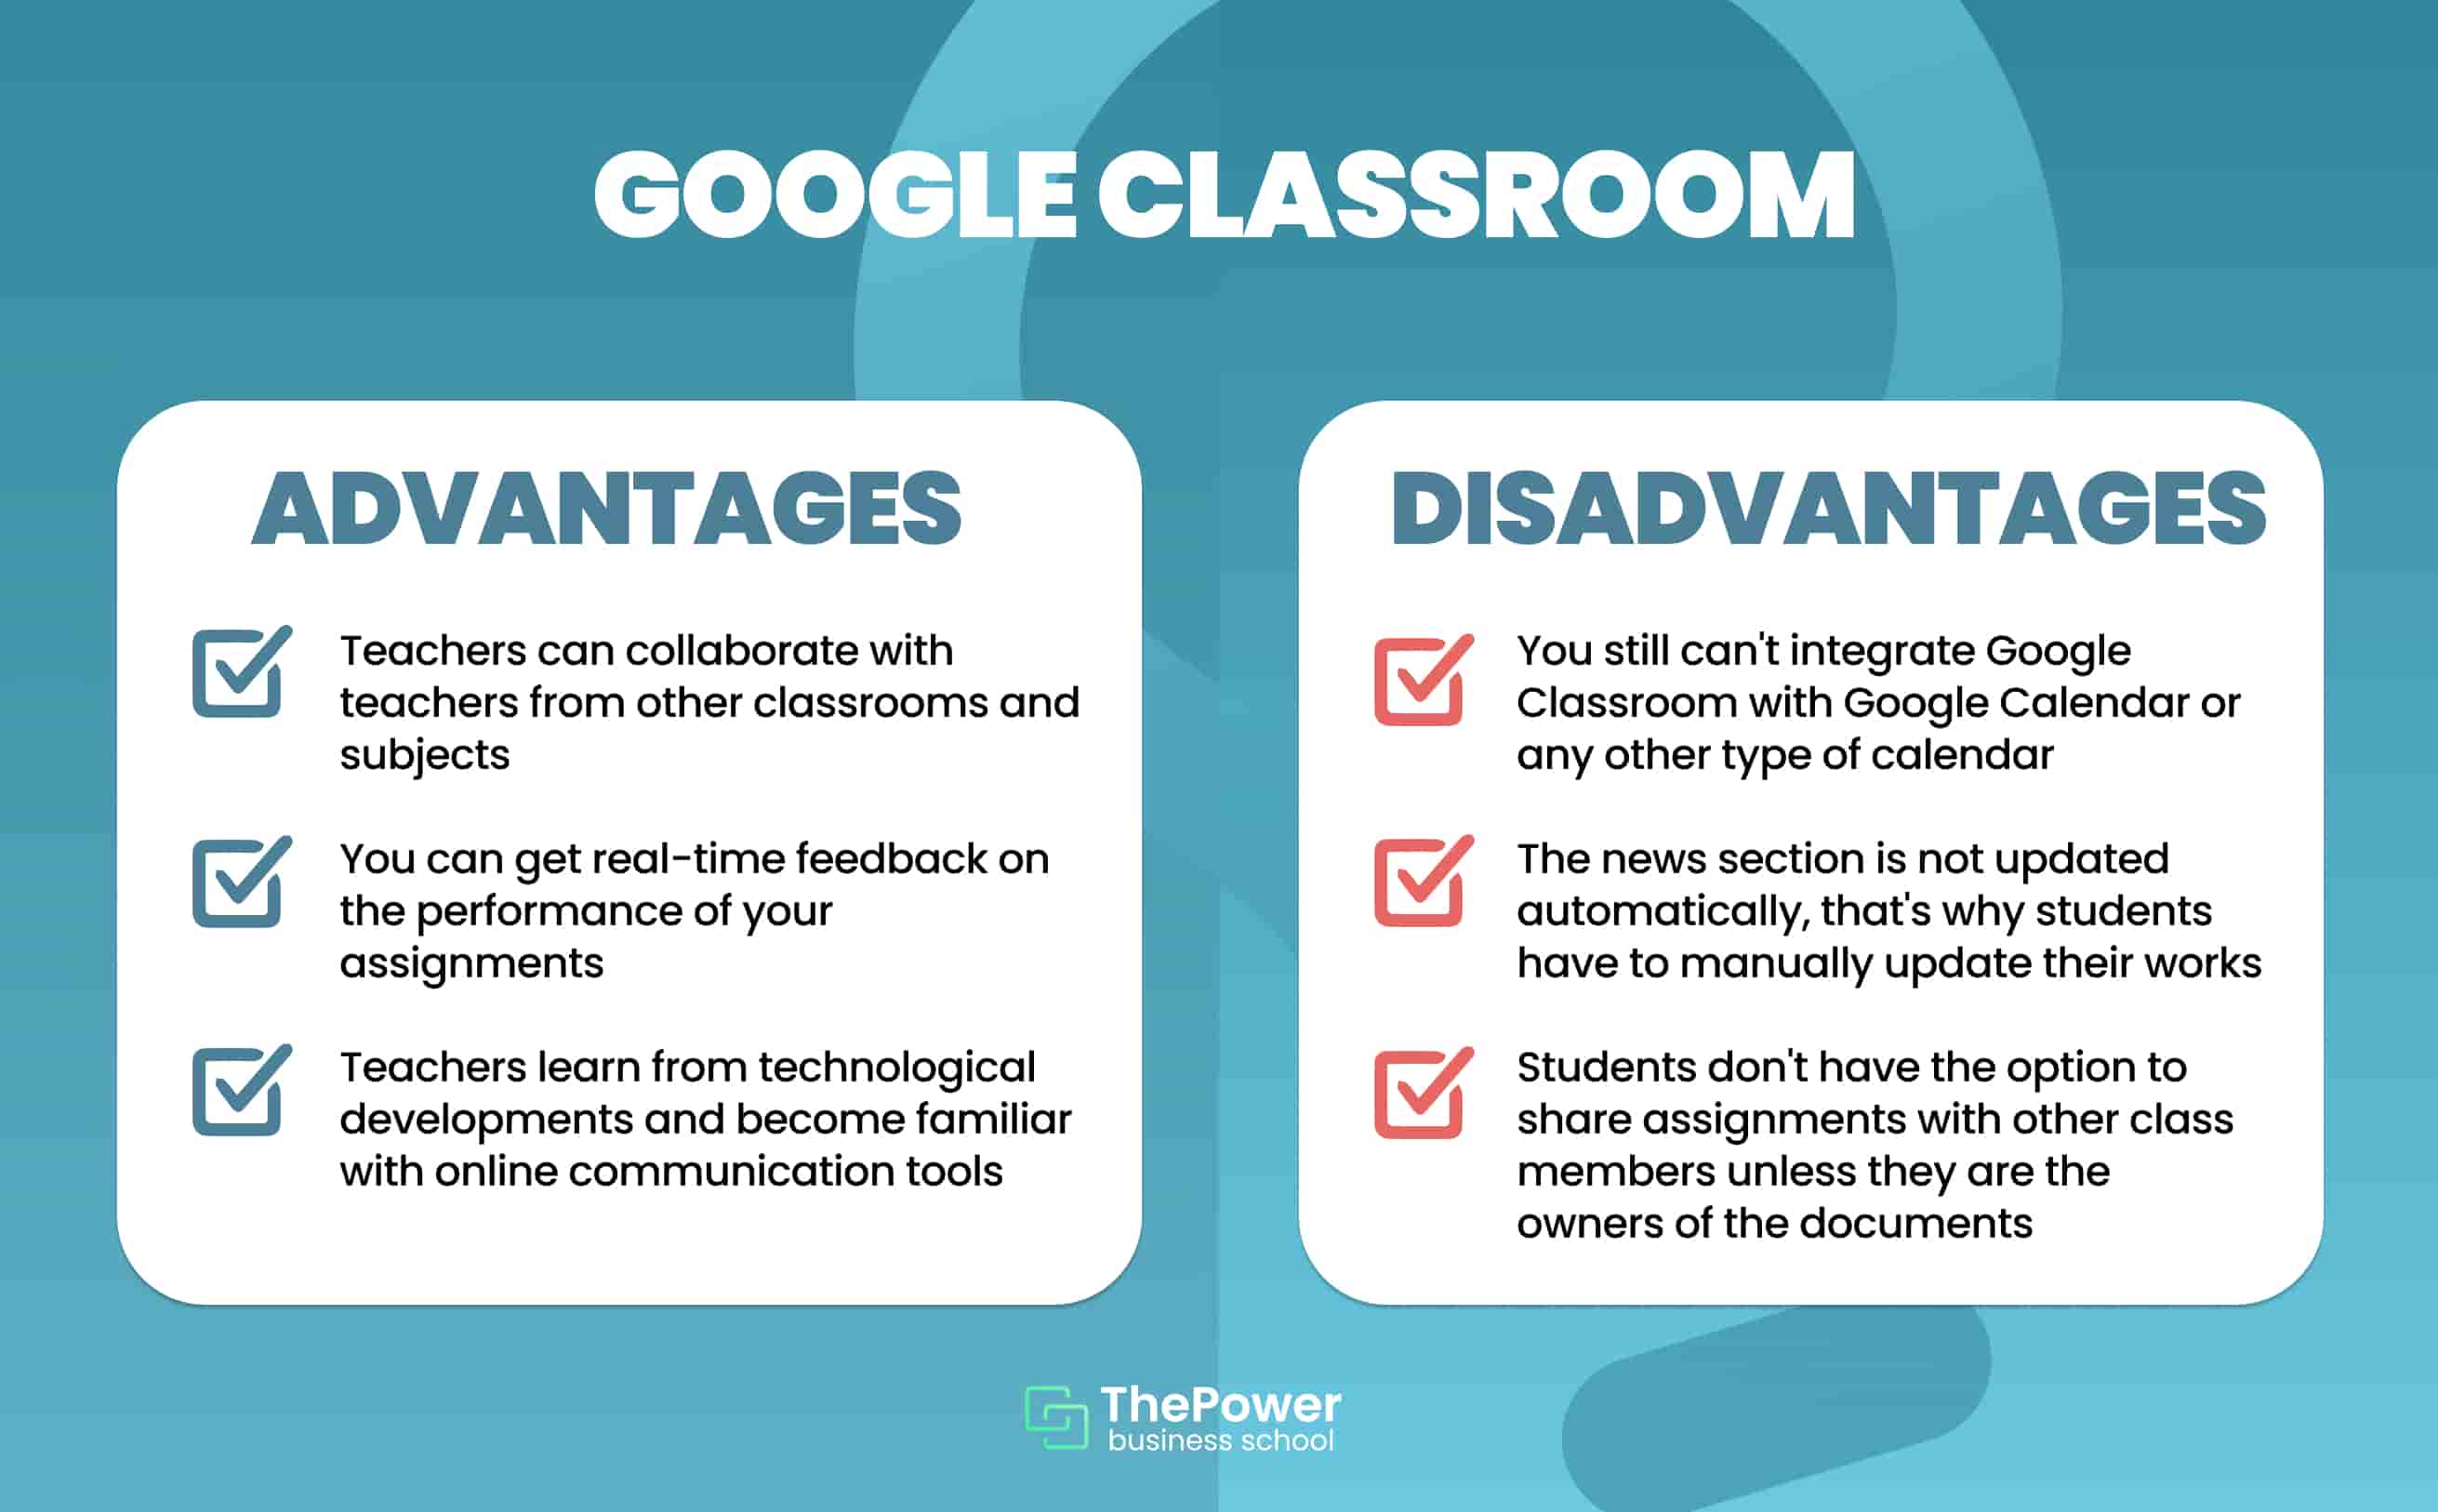 What are the disadvantages of Google Classroom for students?